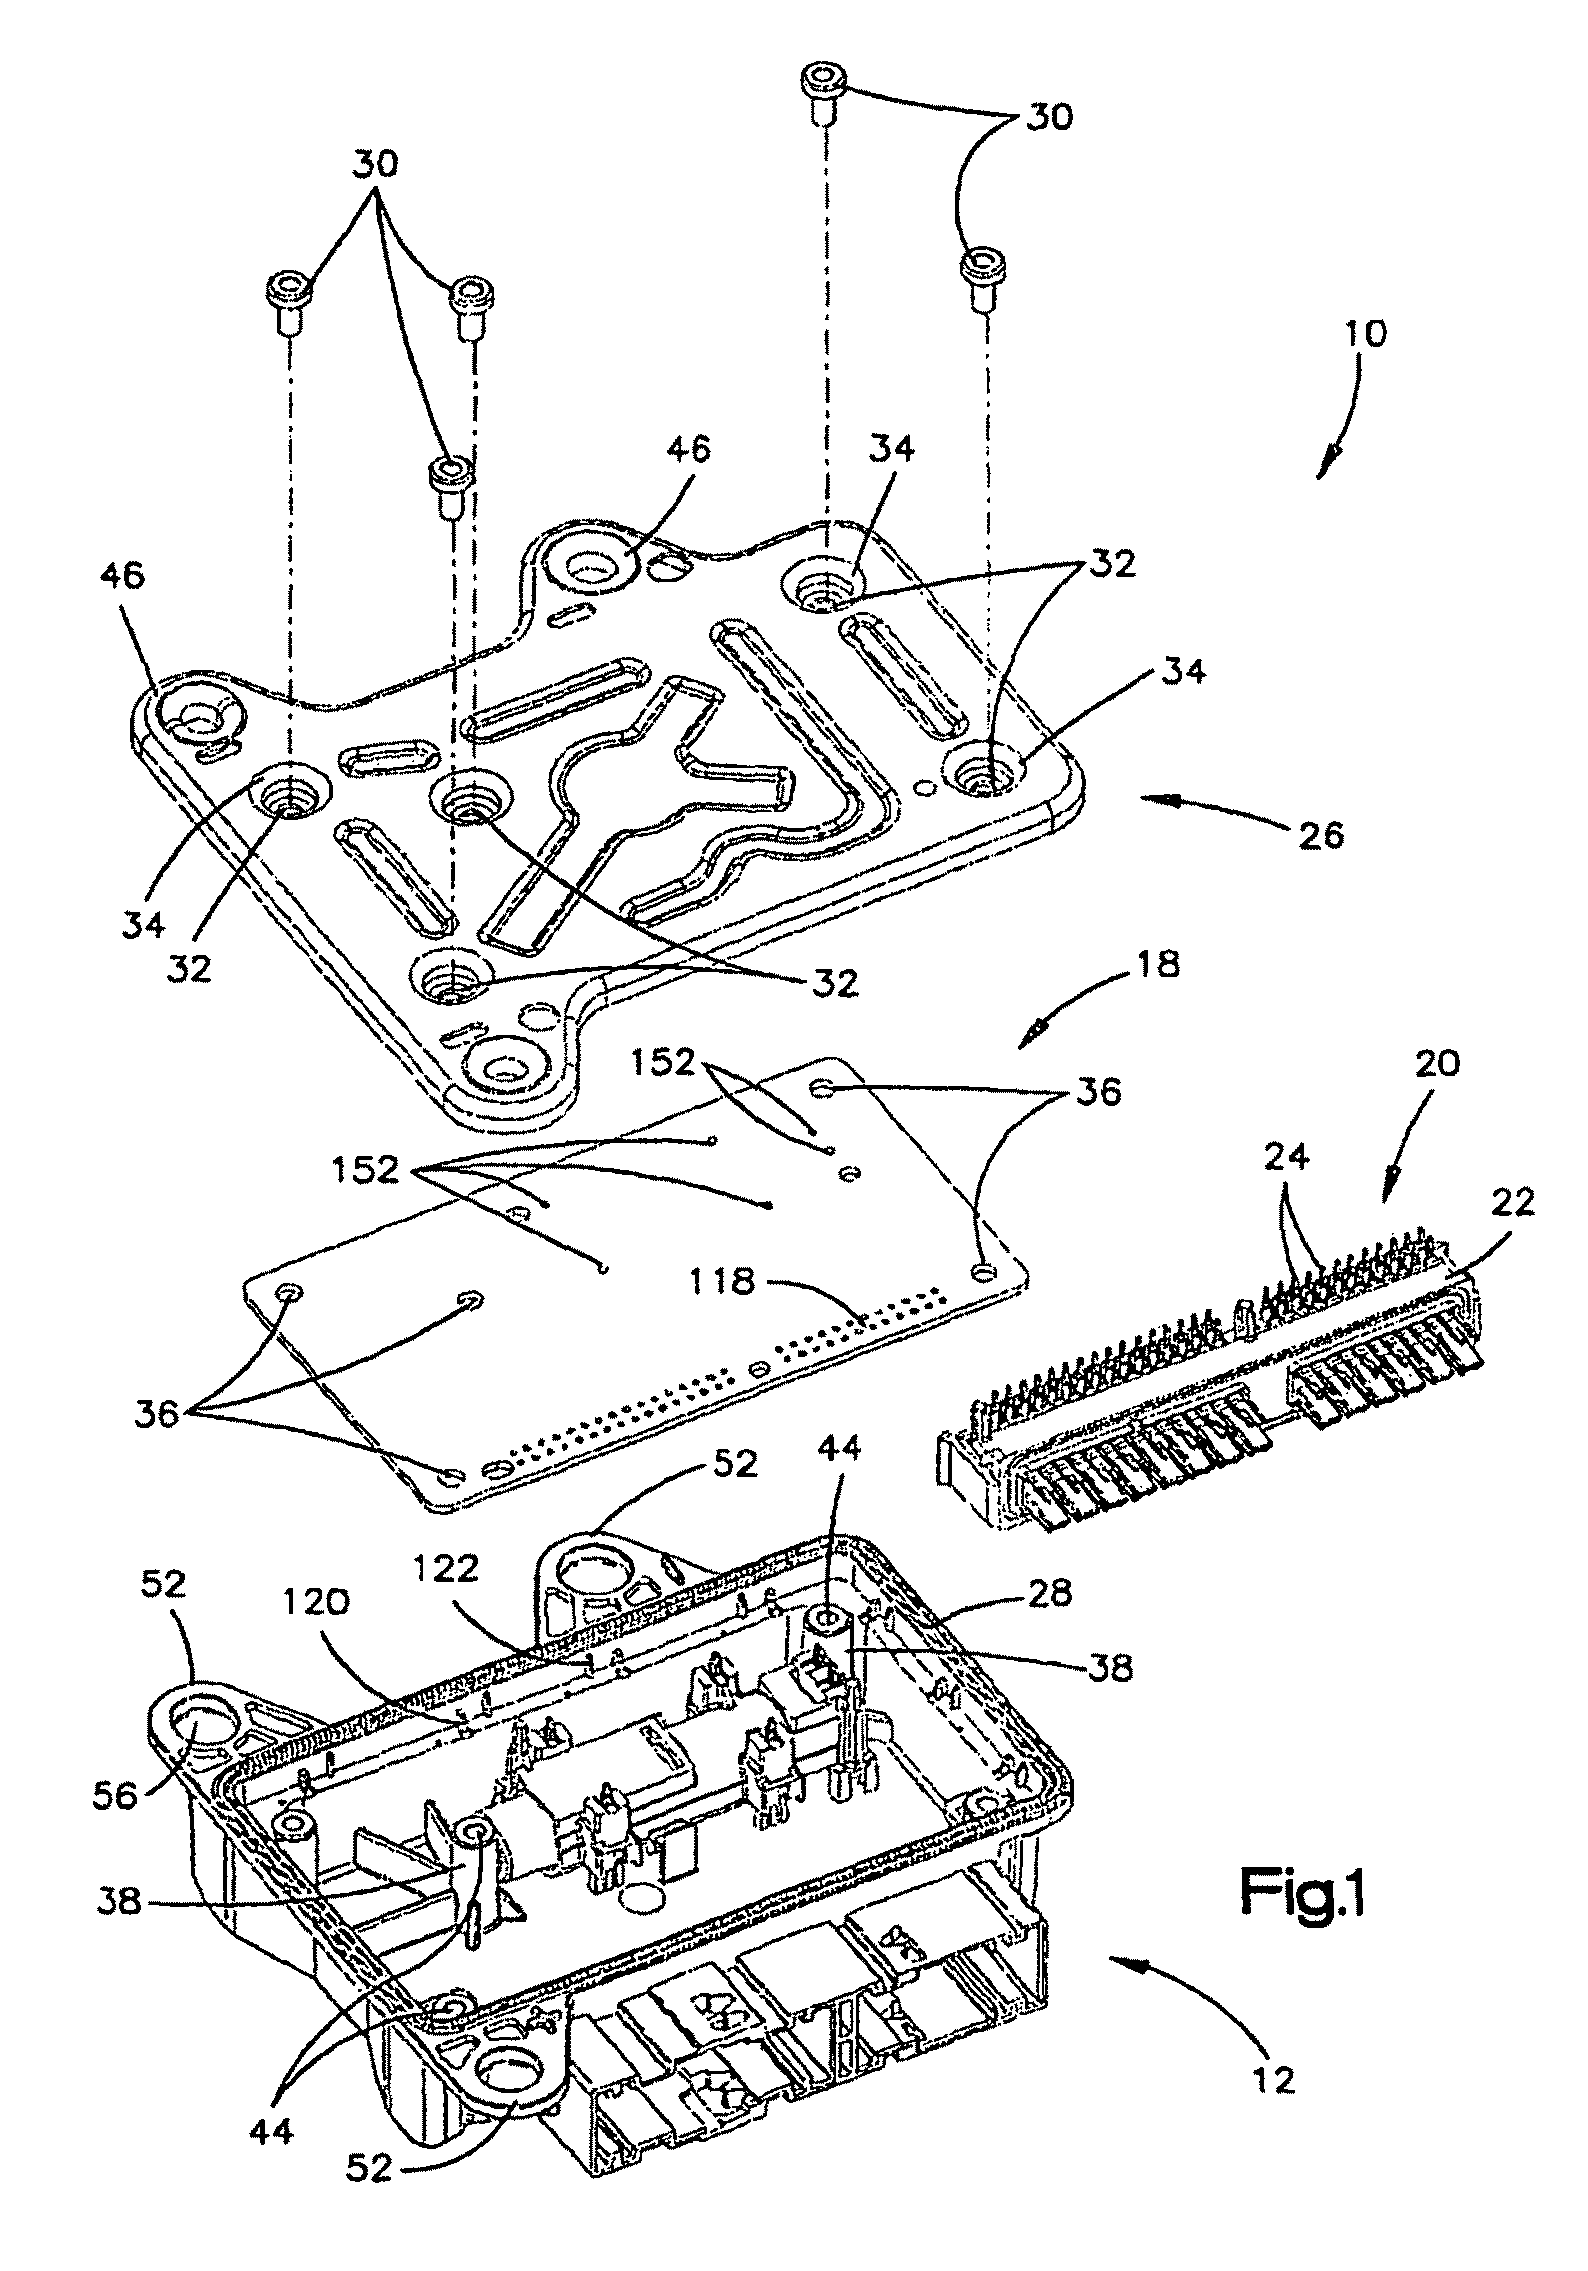 Electronic assembly and method of manufacturing same